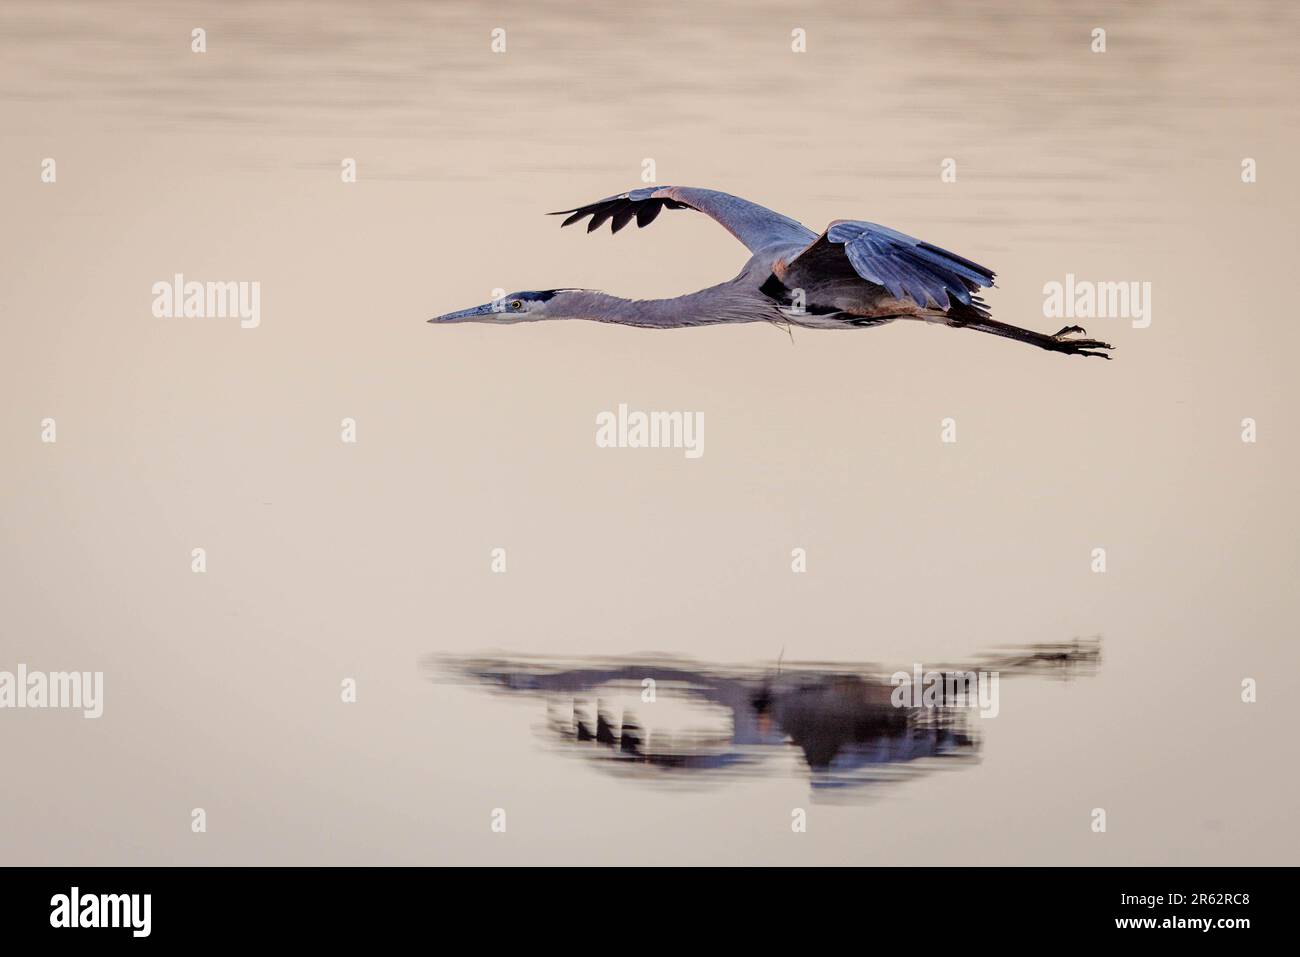 Great Blue Heron, Bosque del Apache National Wildlife Refuge, New Mexico, USA. Stock Photo